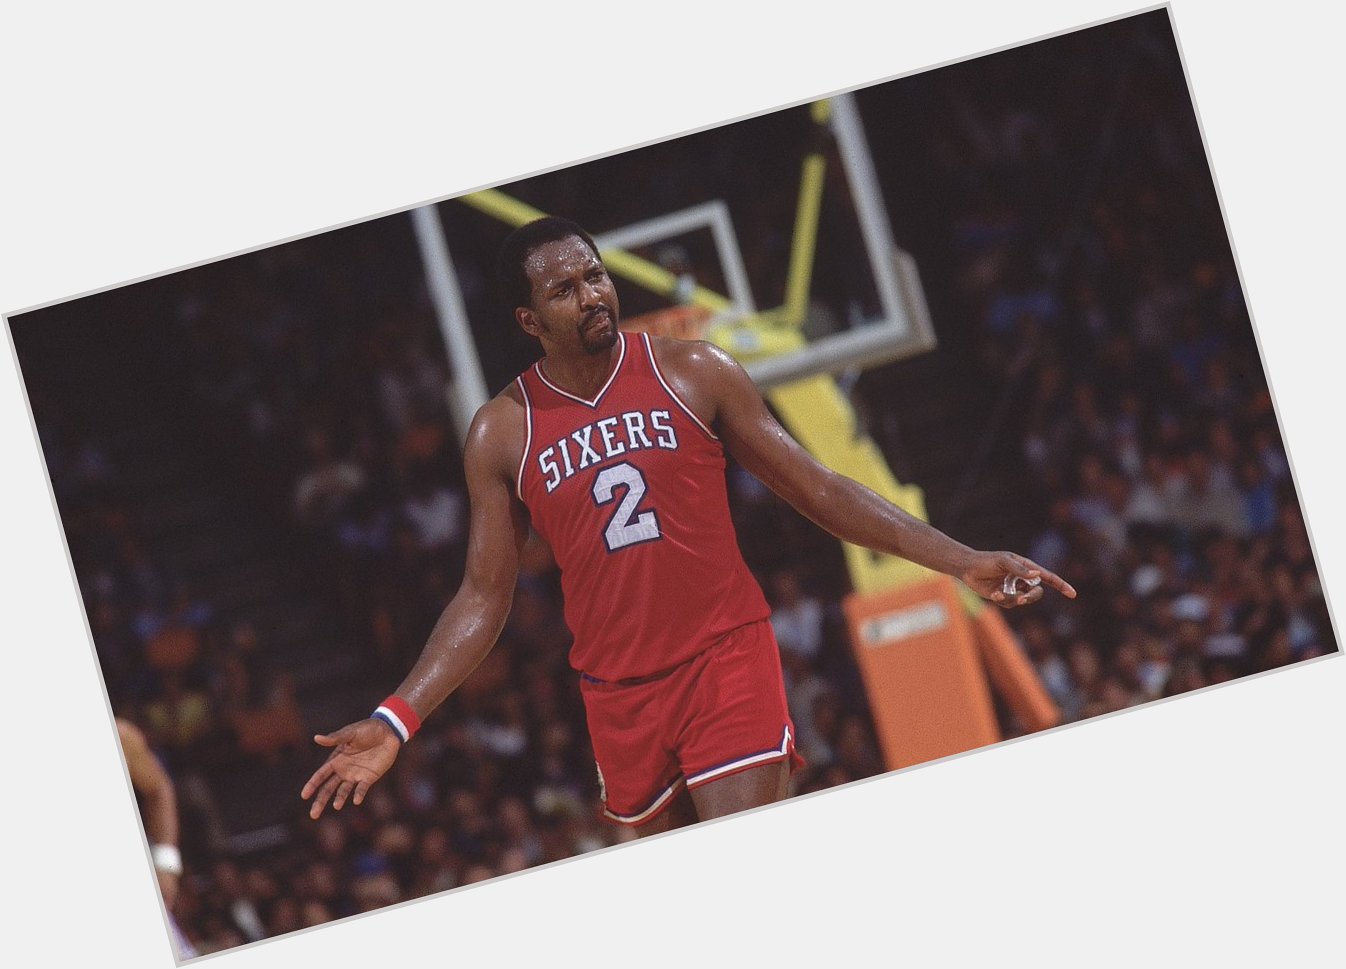 Happy Birthday to Moses Malone, who would have turned 62 today! 